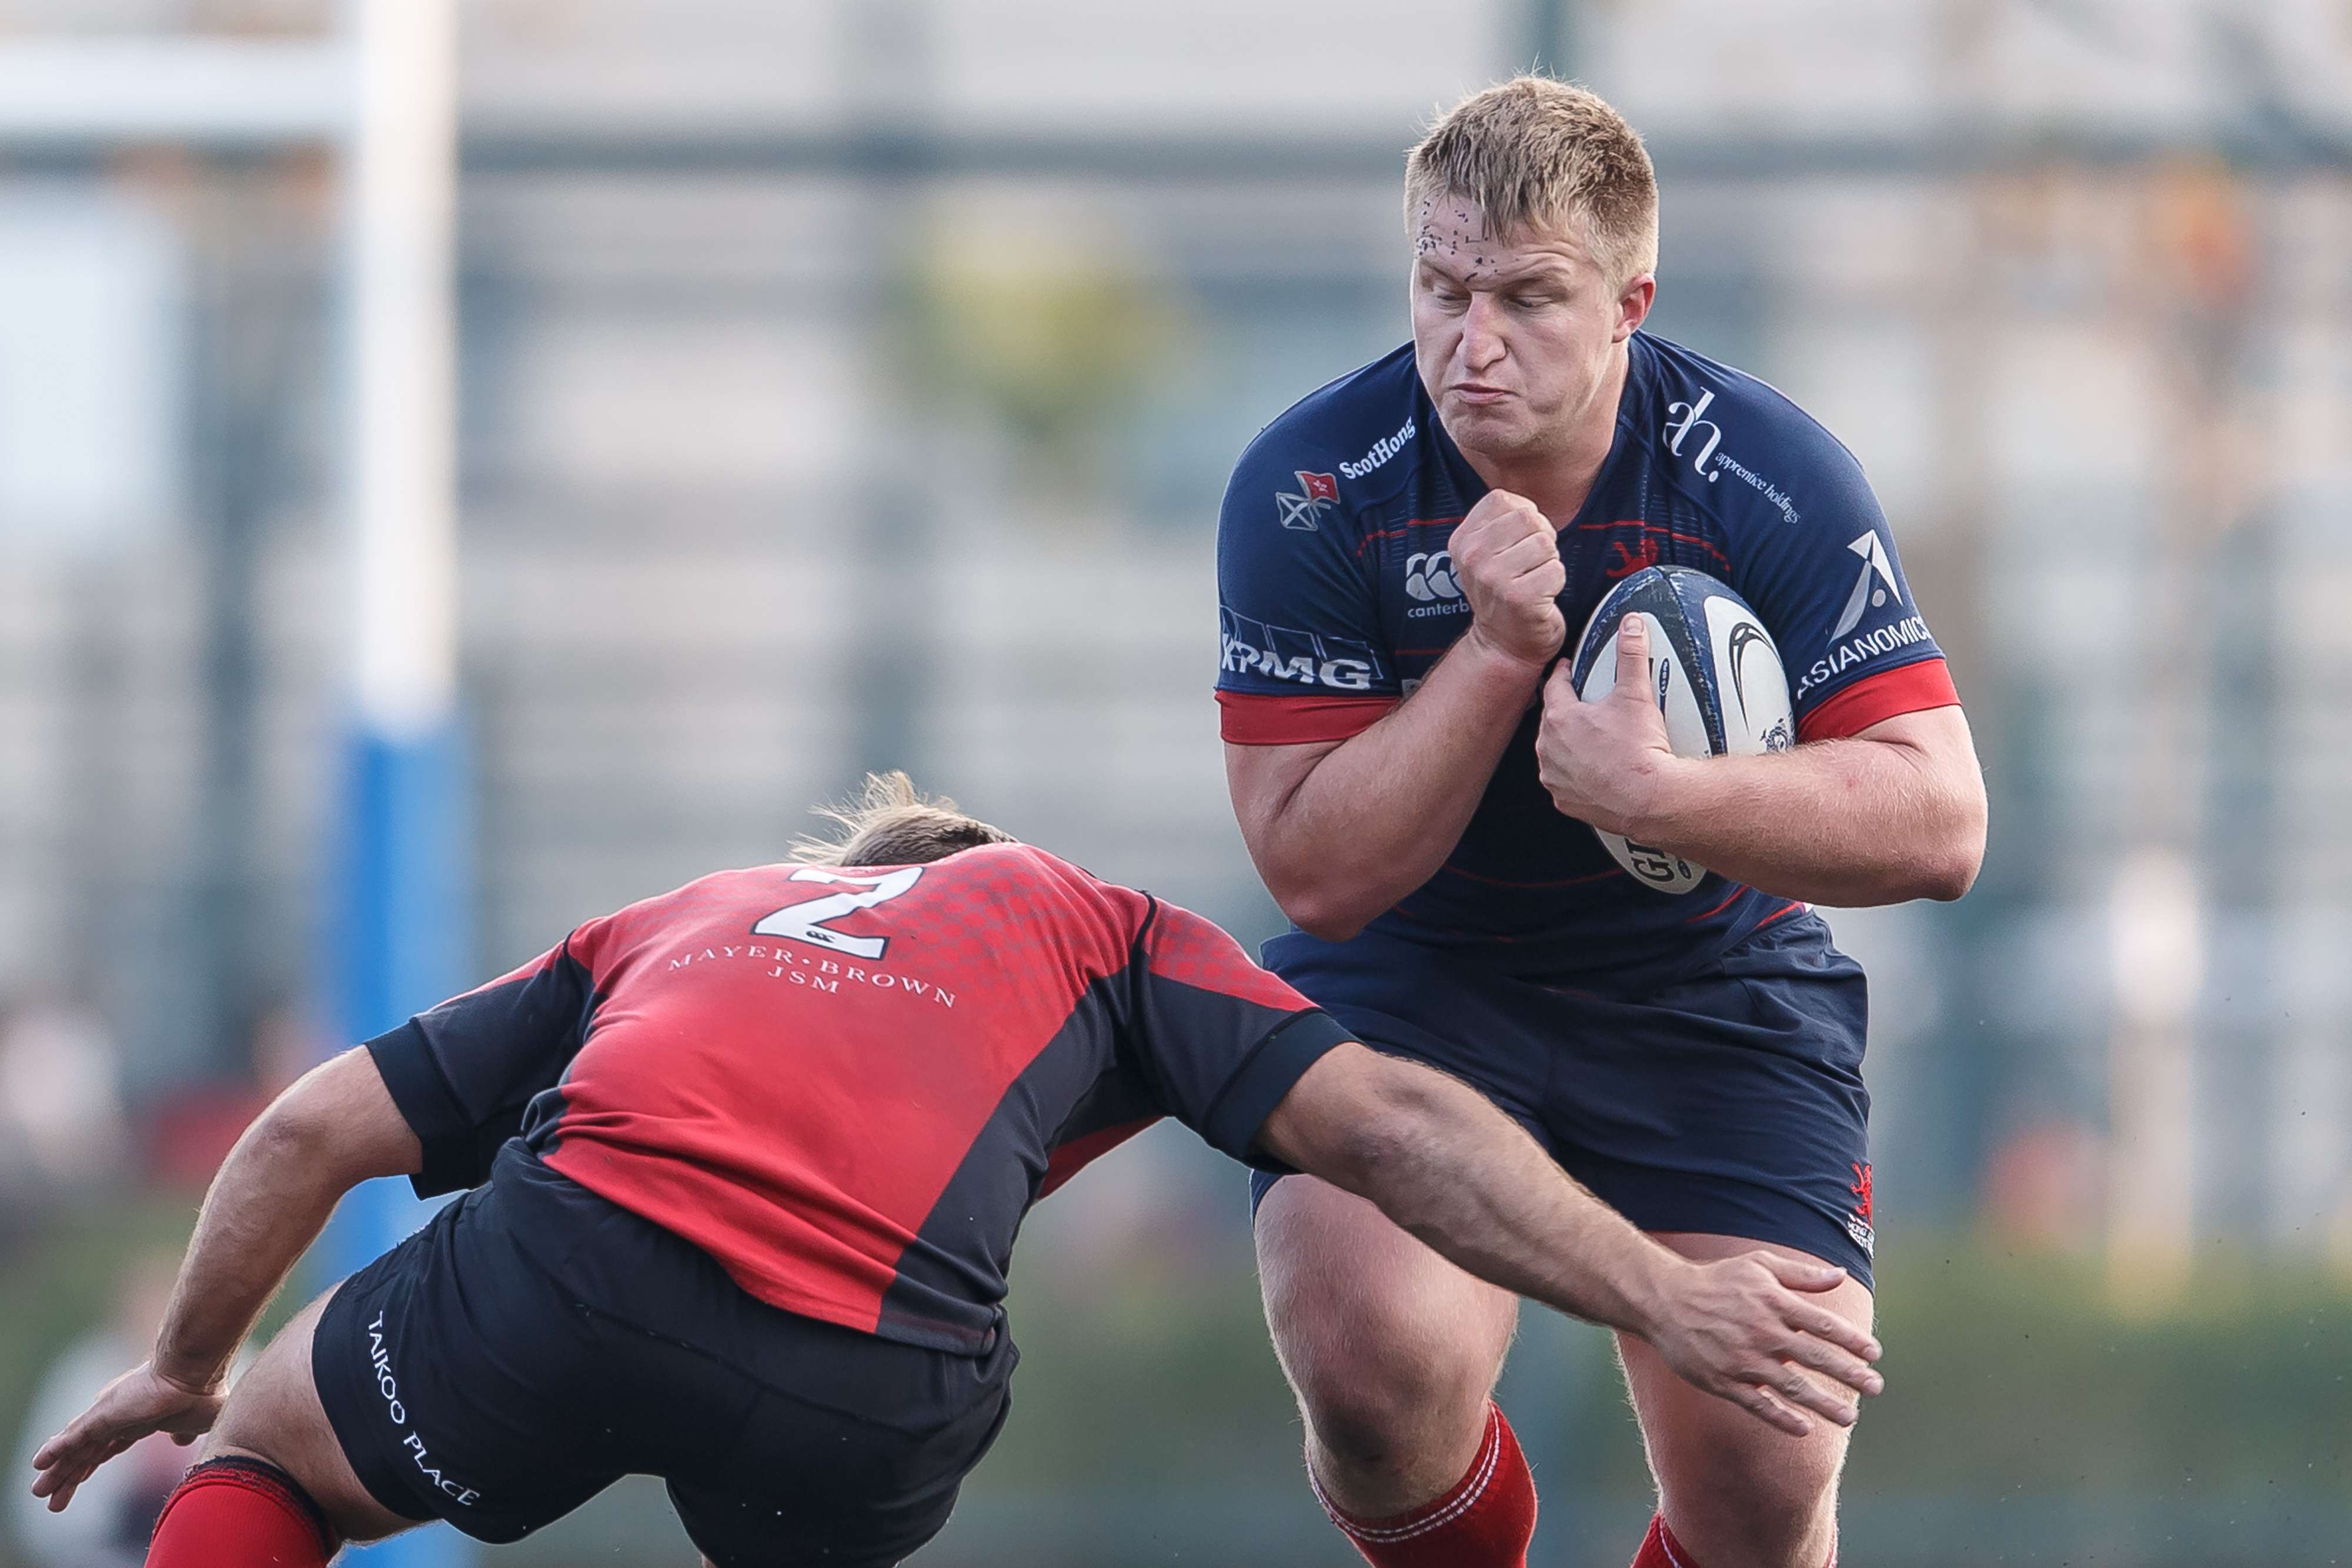 HK Scottish prop Jack Parfitt braces for contact against Valley in the Hong Kong Premiership on Saturday. Photo: HKRU